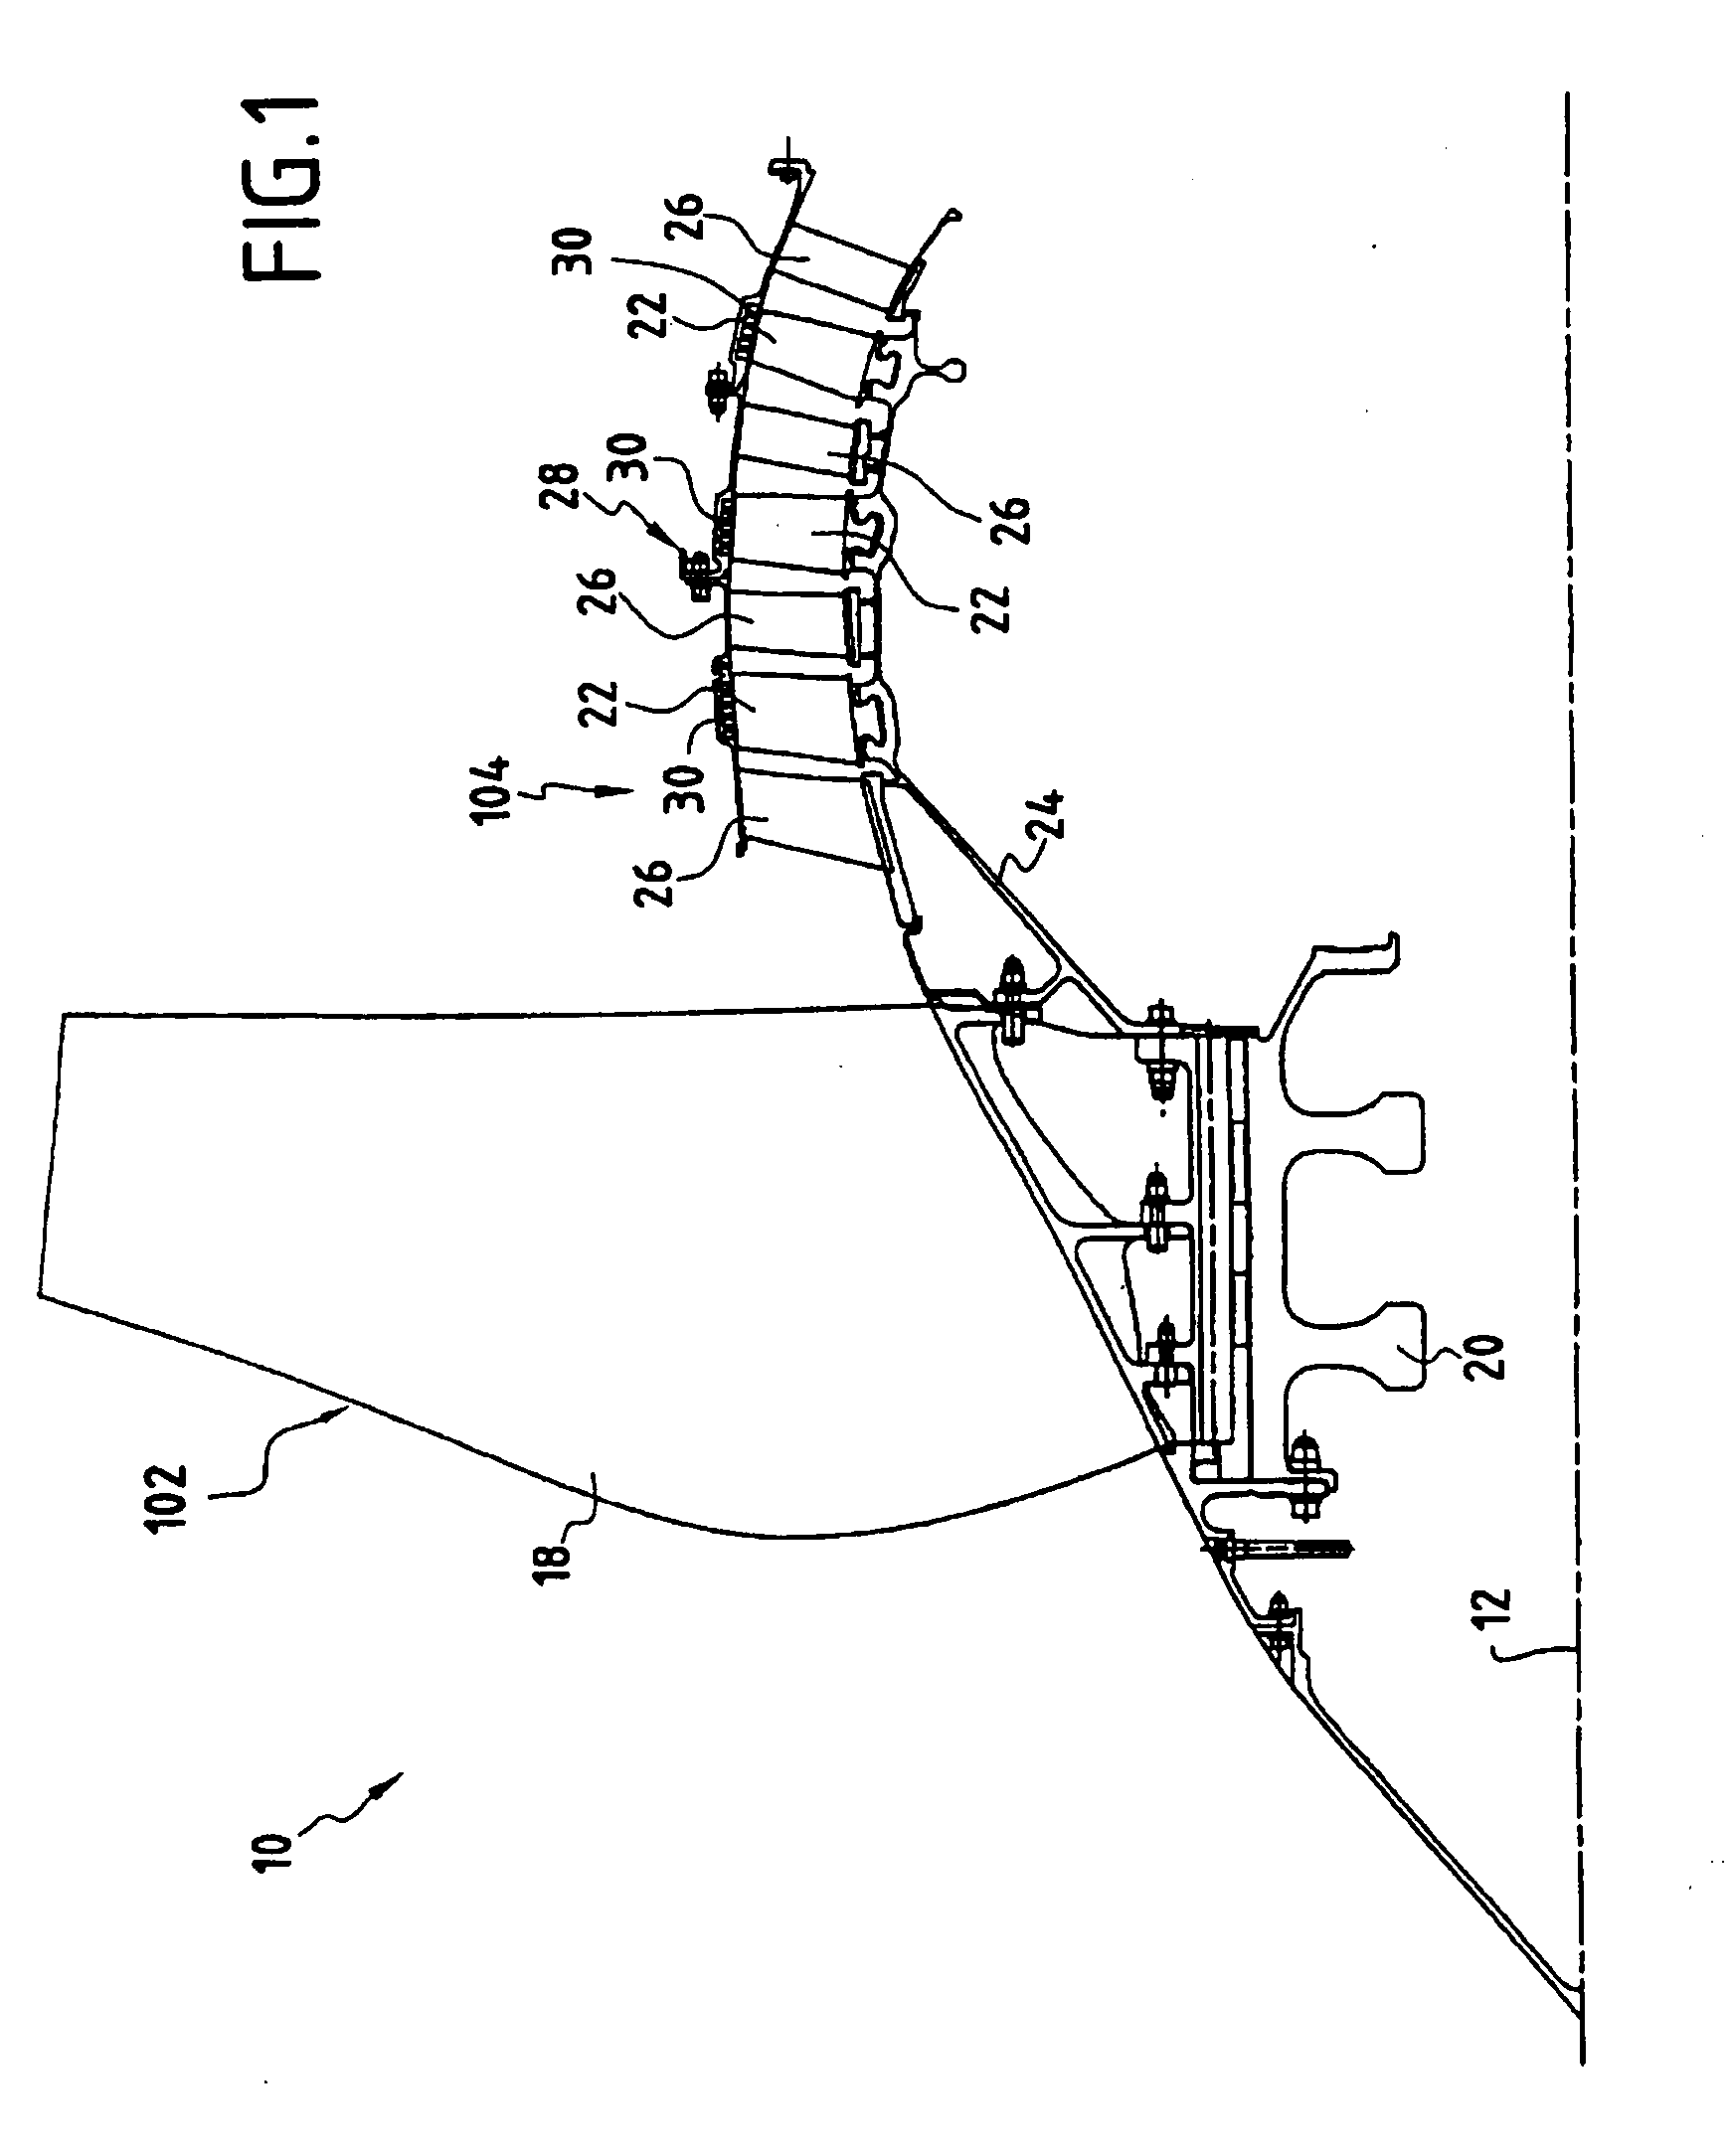 Abradable material composition, a thermomechanical part or casing including a coating, and a method of fabricating or repairing a coating presenting said composition